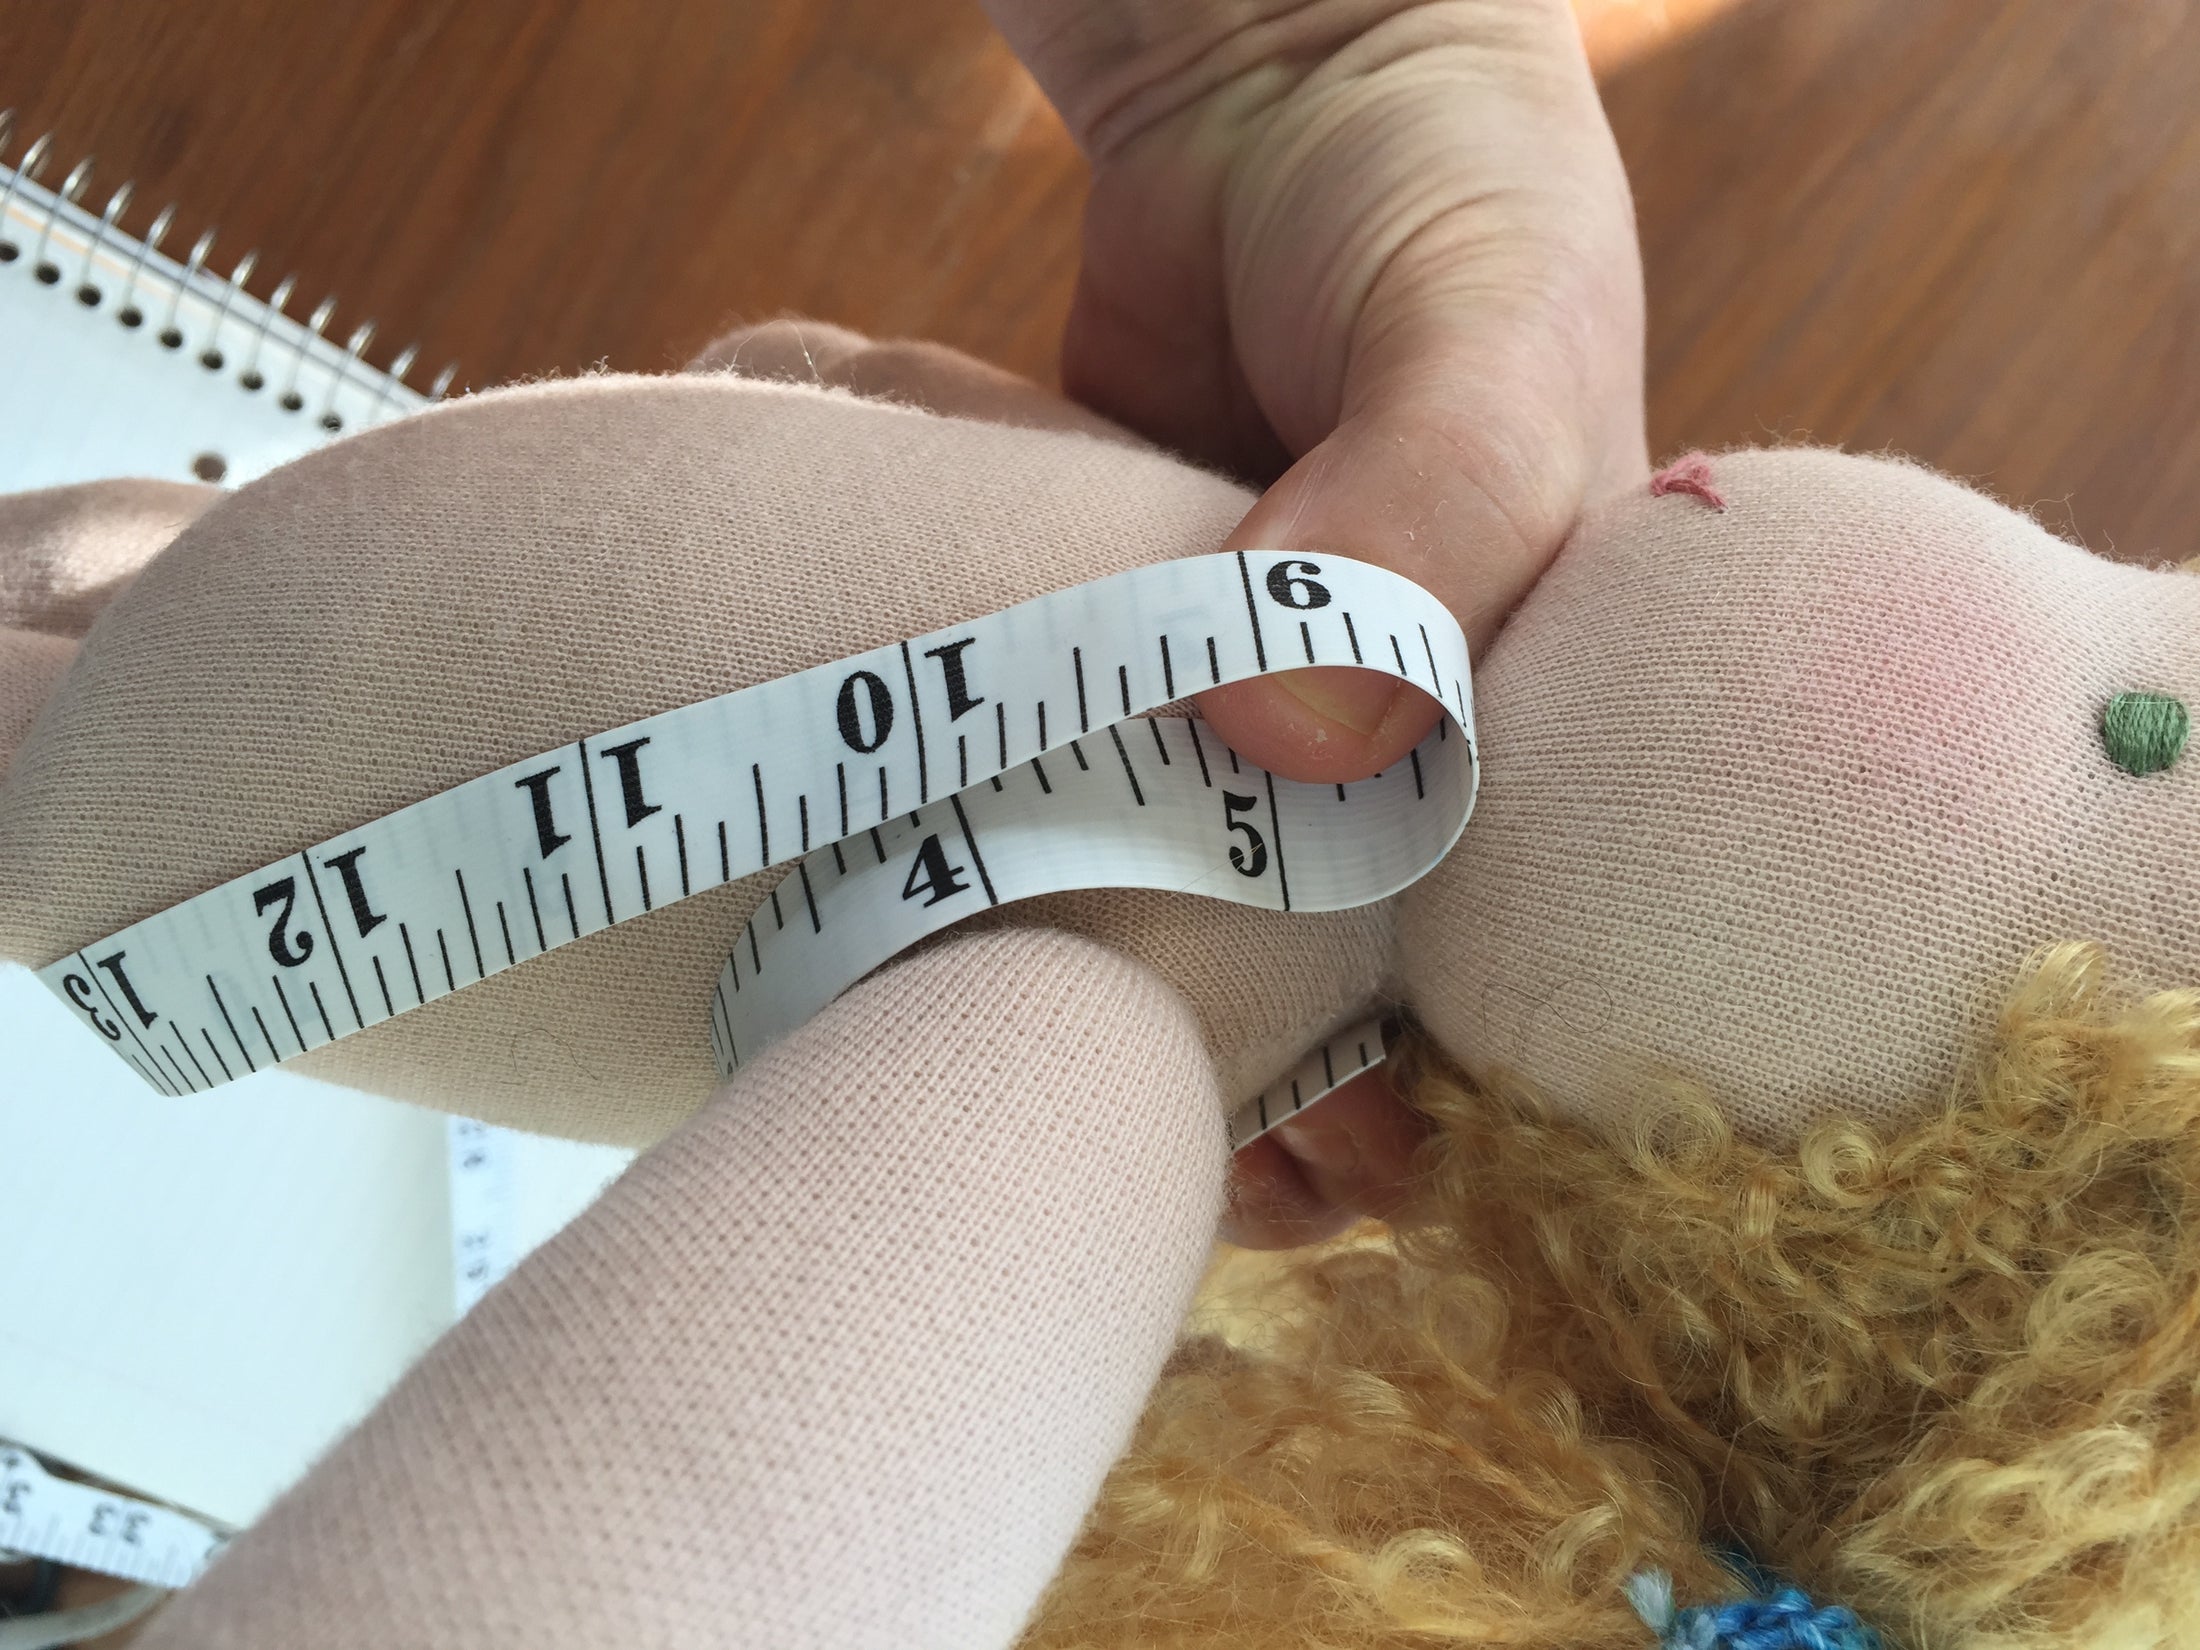 Traditional Doll Outfit Pattern